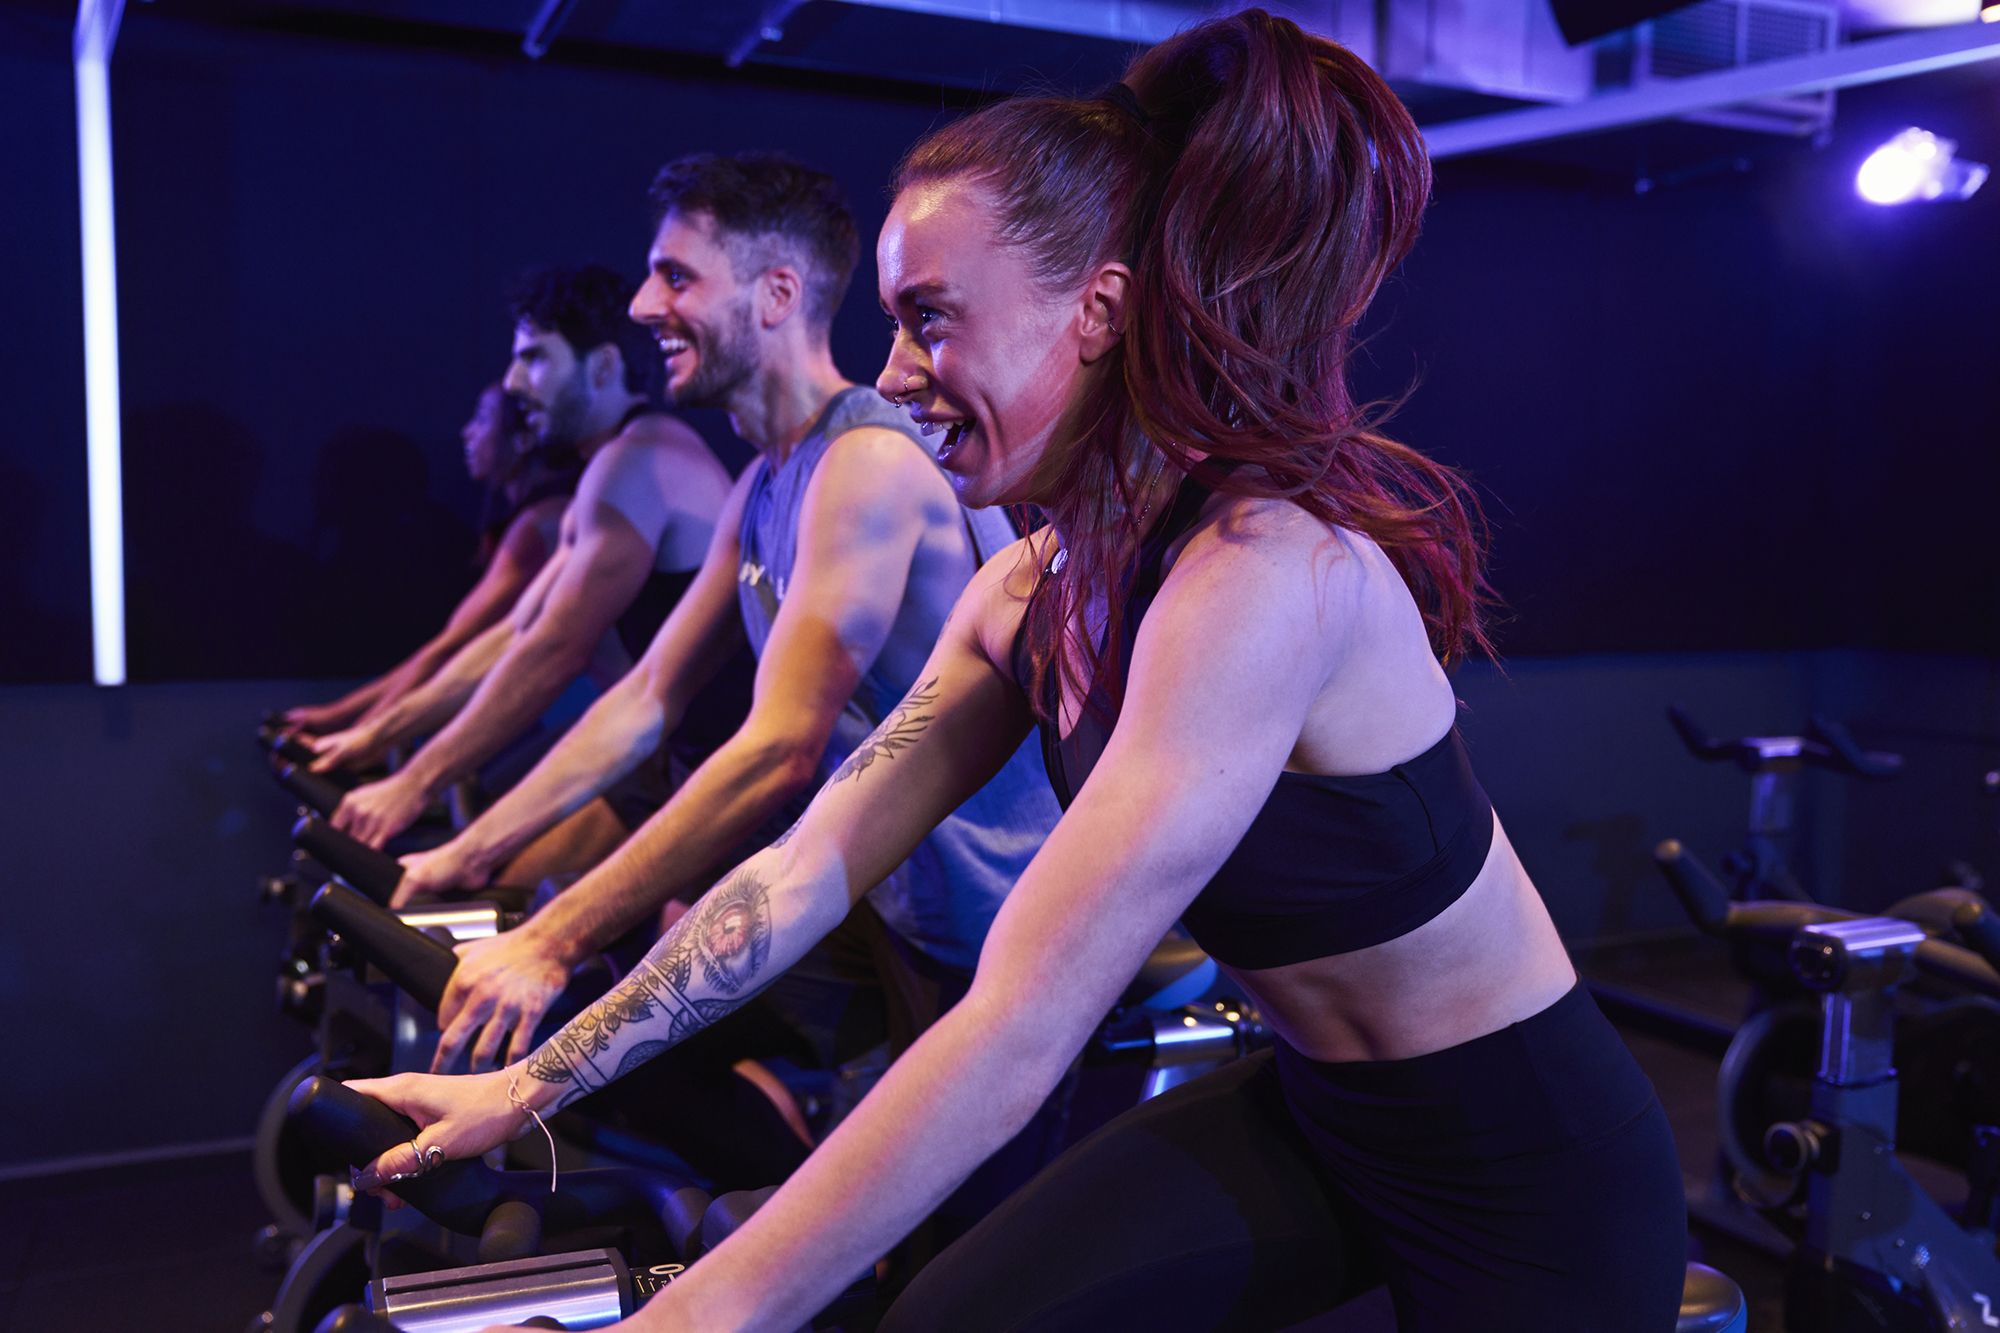 The benefits of indoor cycling and how it can deliver effective, efficient  fitness results